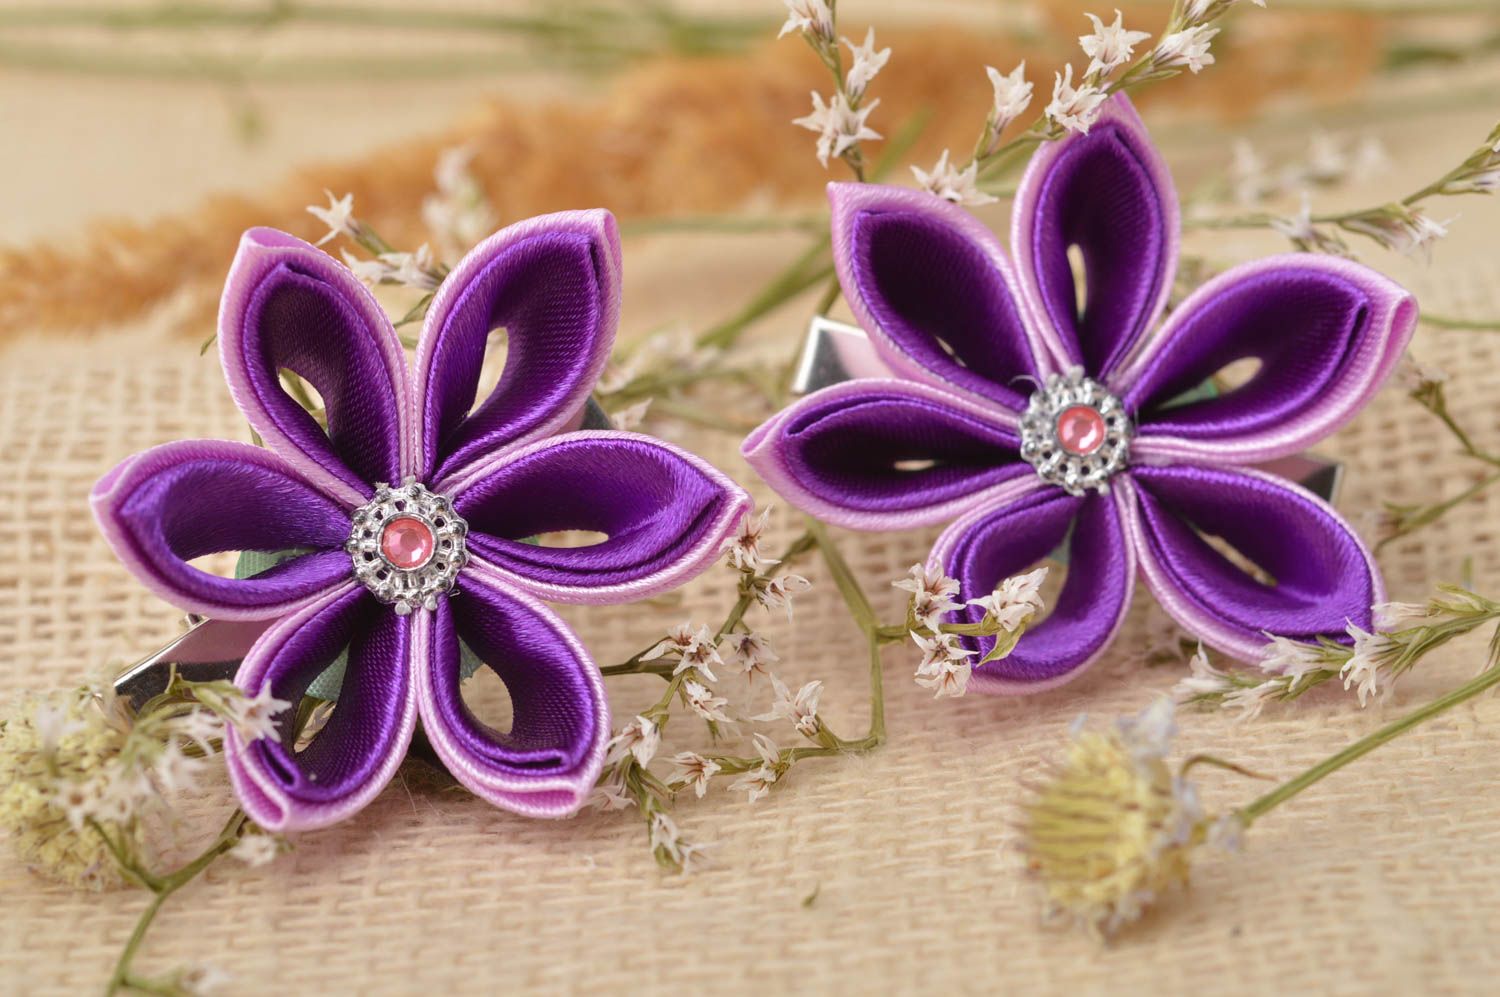 Handmade hair clips for kids stylish kanzashi hair clips 2 pieces violets photo 5